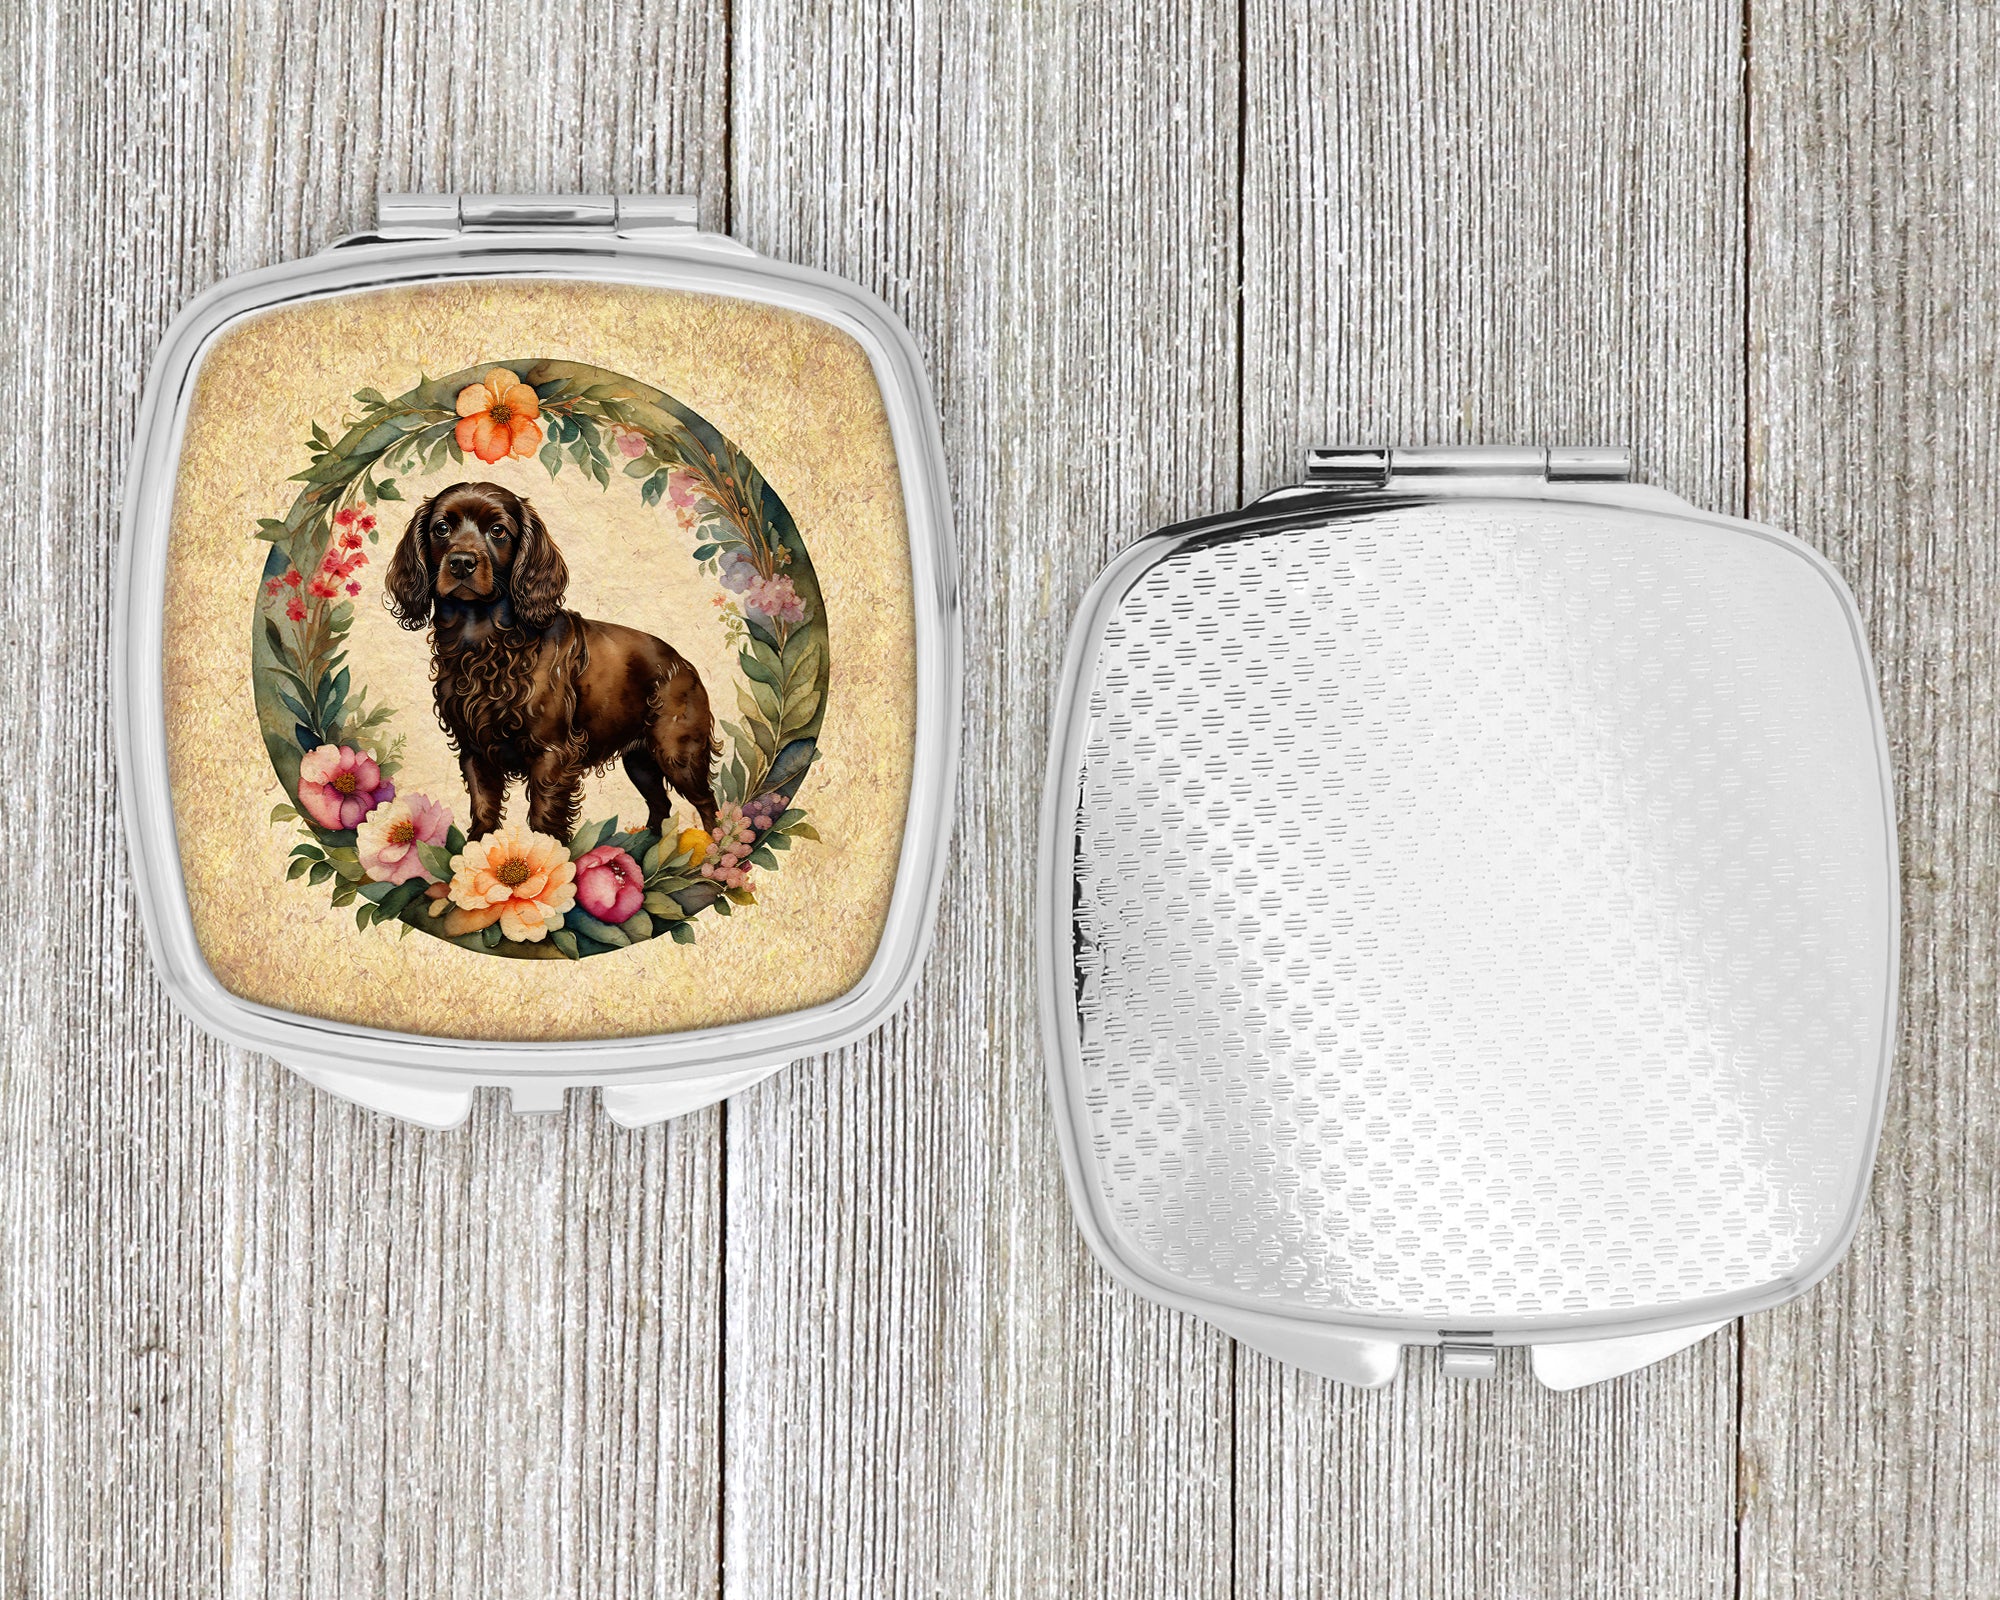 Boykin Spaniel and Flowers Compact Mirror